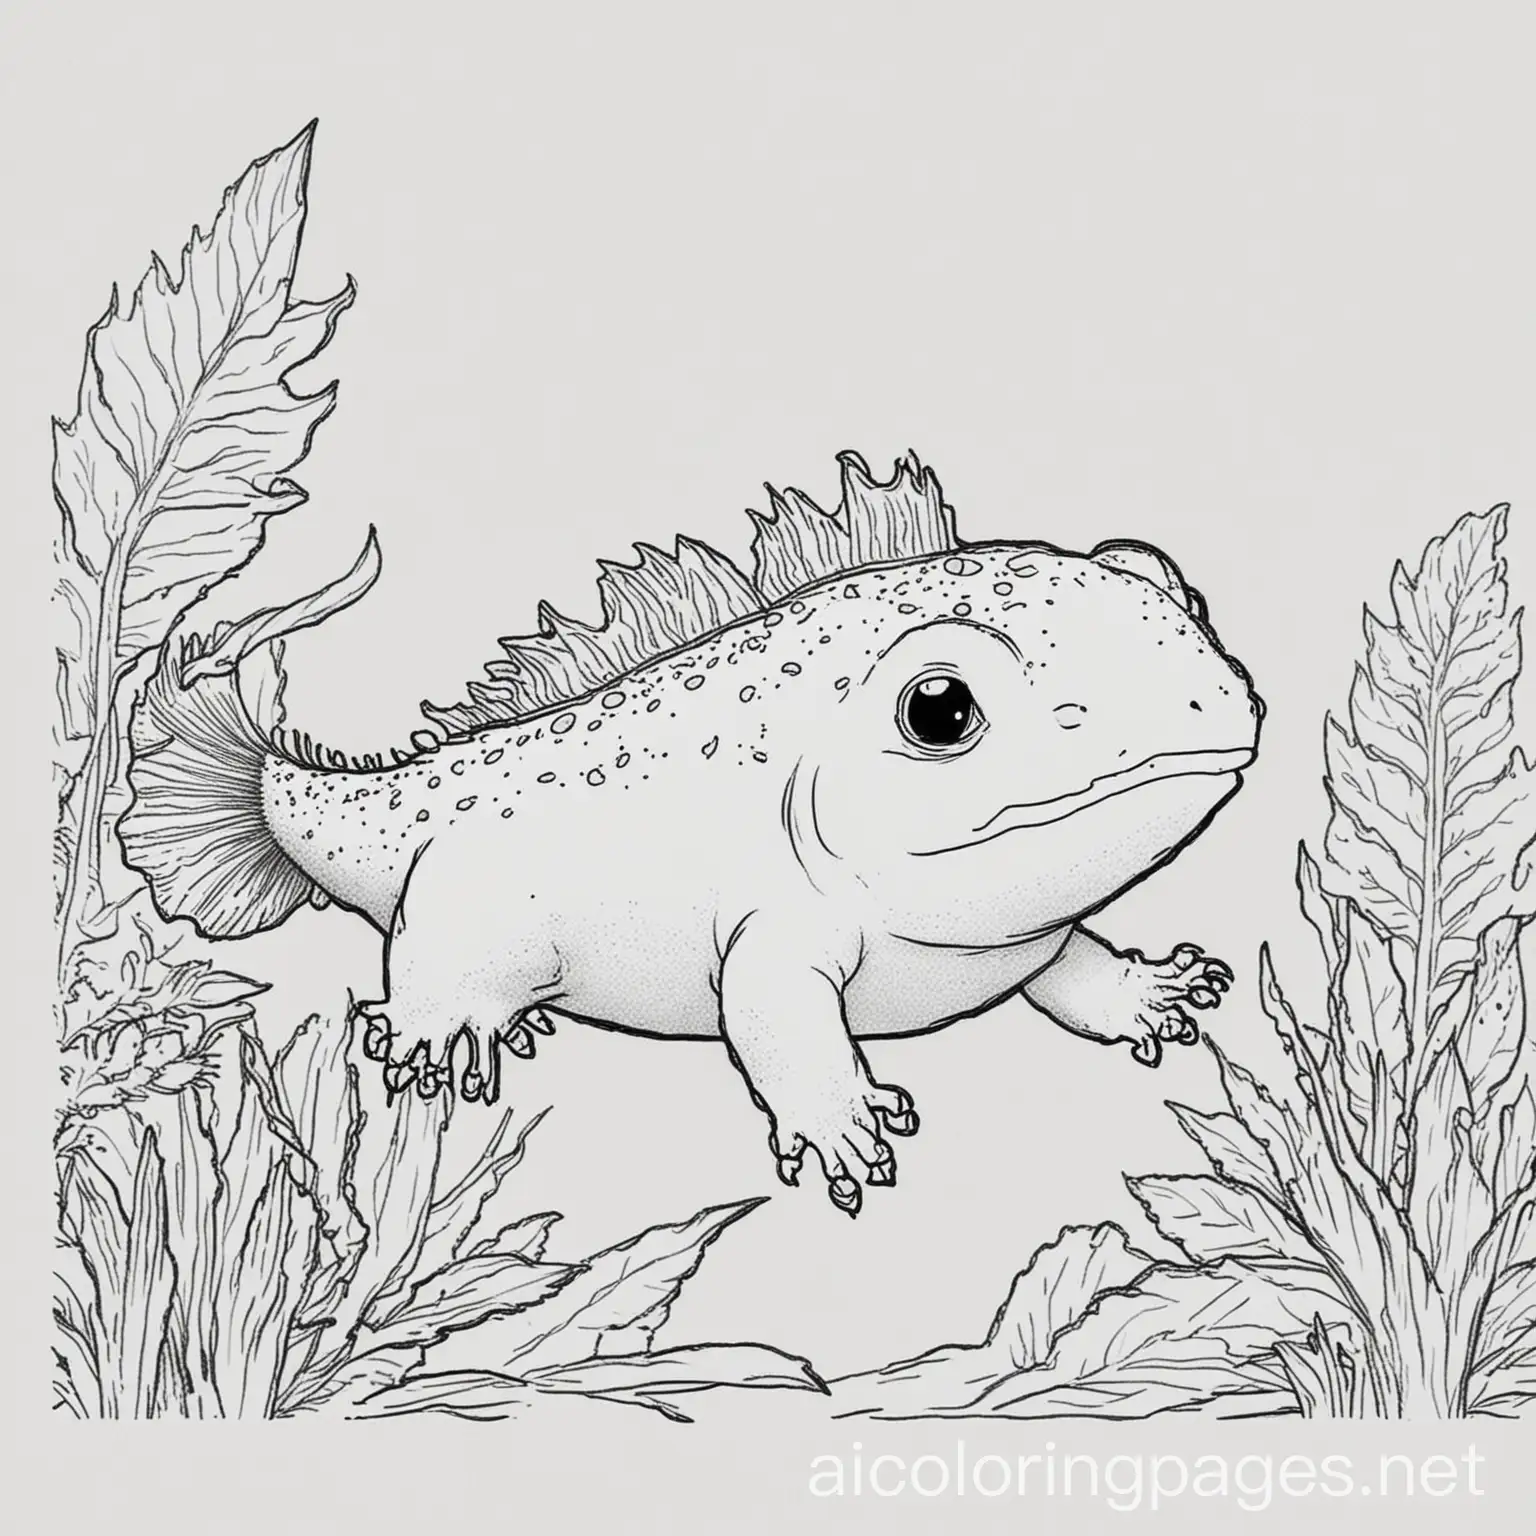 axolotl, Coloring Page, black and white, line art, white background, Simplicity, Ample White Space. The background of the coloring page is plain white to make it easy for young children to color within the lines. The outlines of all the subjects are easy to distinguish, making it simple for kids to color without too much difficulty